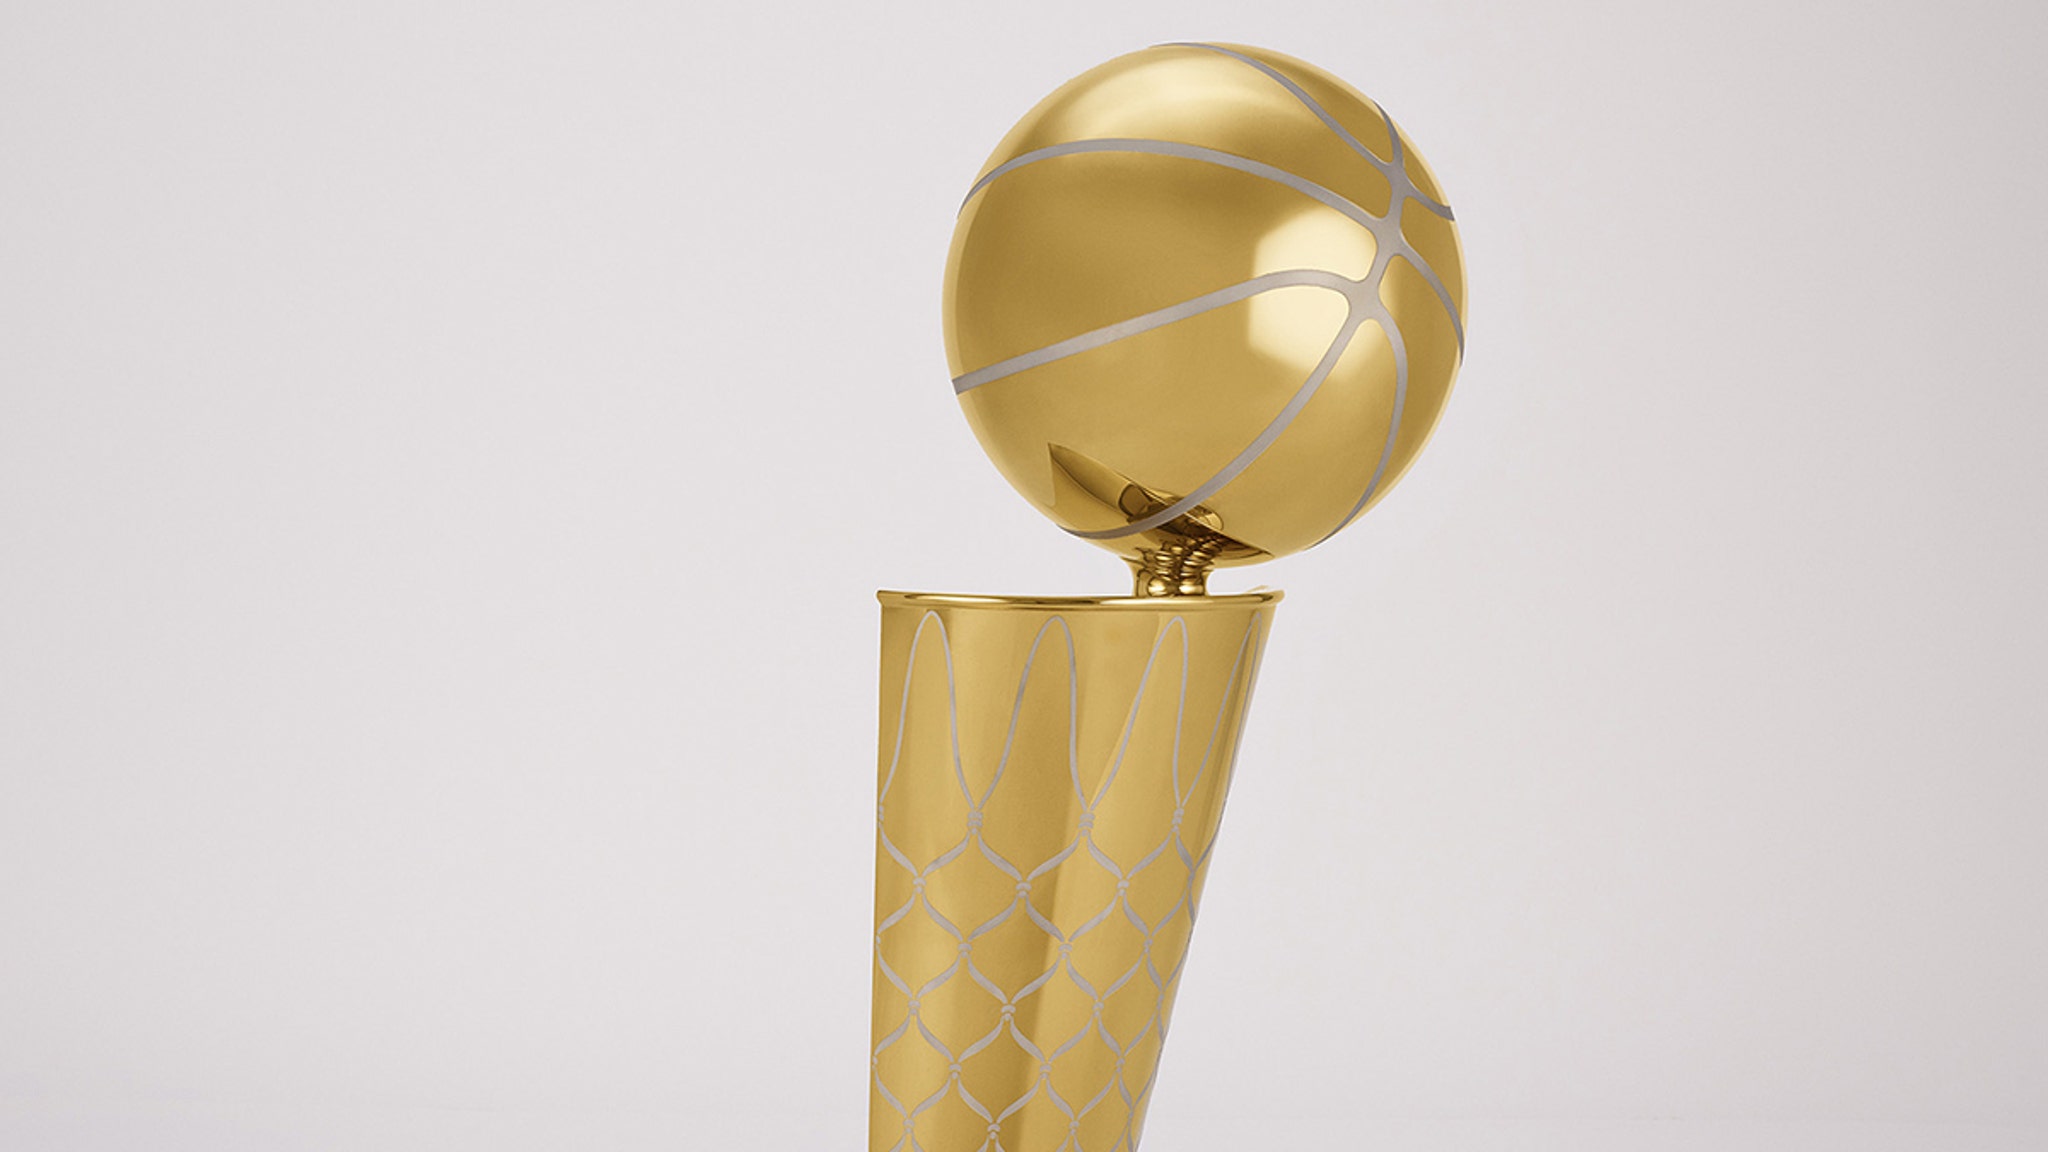 Who is Larry O'Brien? Why NBA Finals trophy is named after former league  commissioner